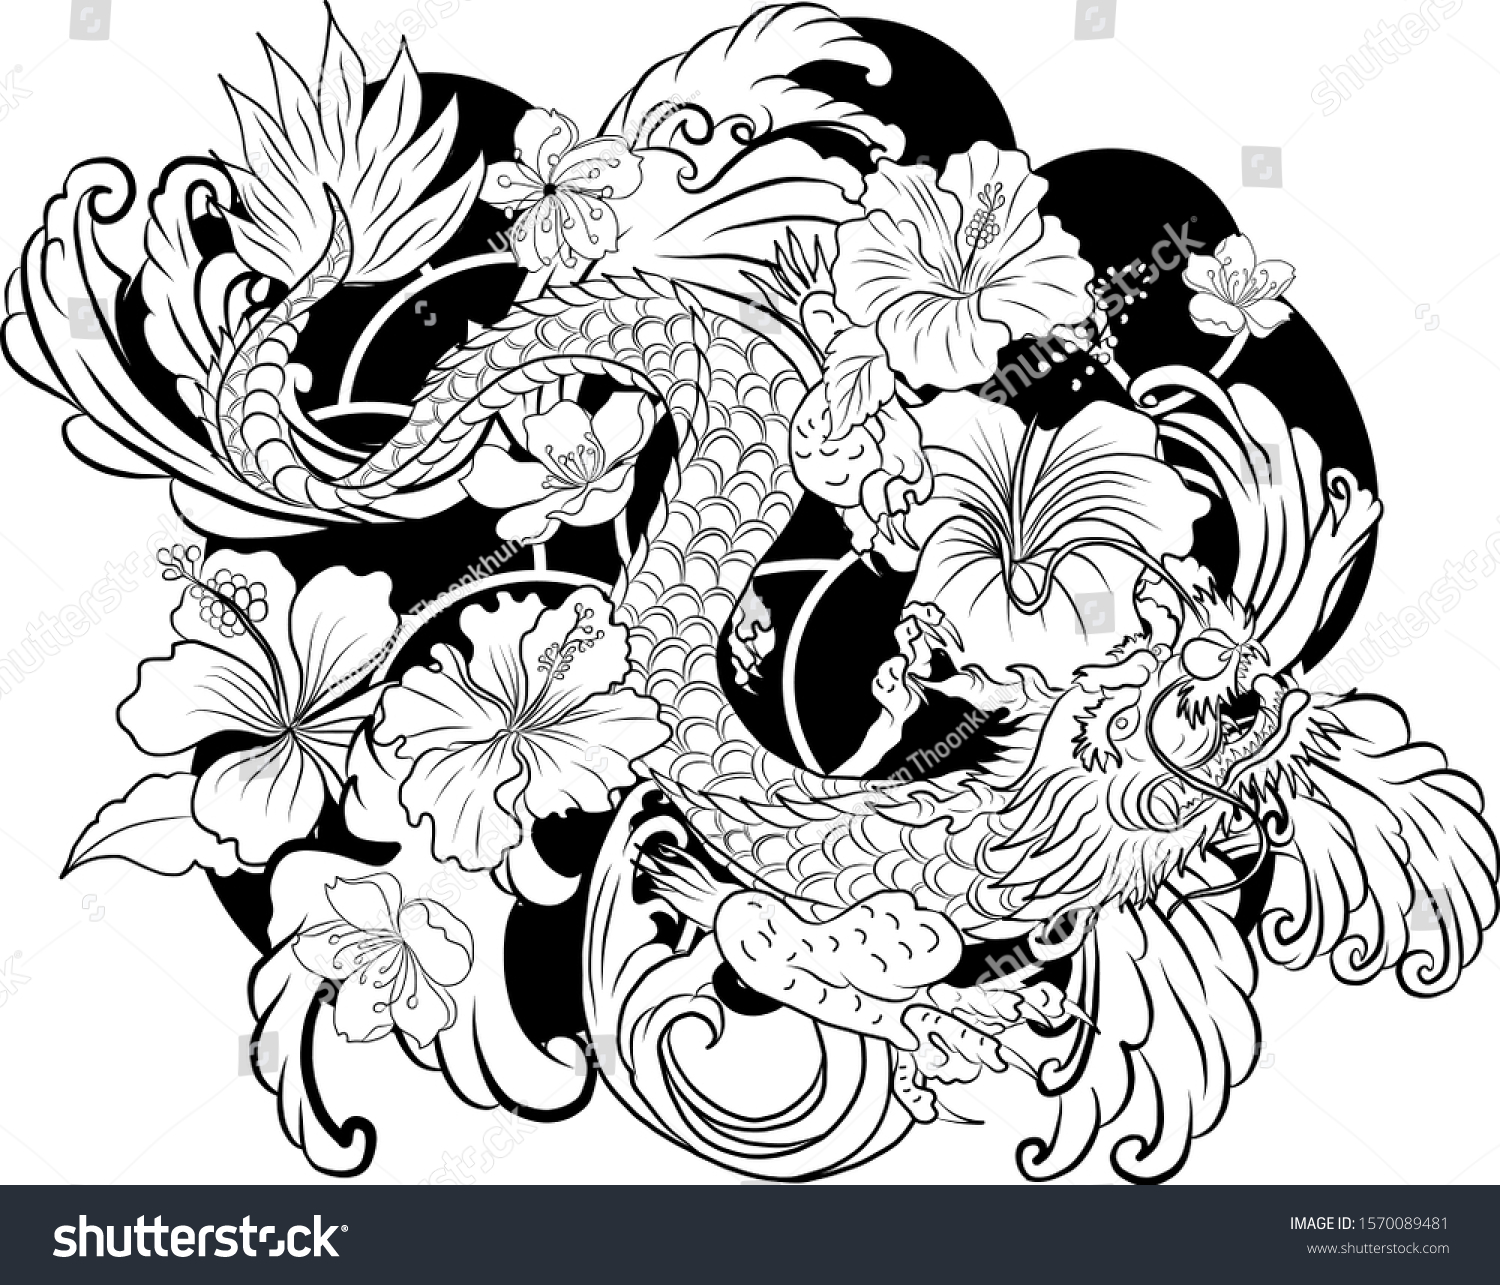 Download Hand Drawn Dragon Tattoo Coloring Book Stock Vector Royalty Free 1570089481